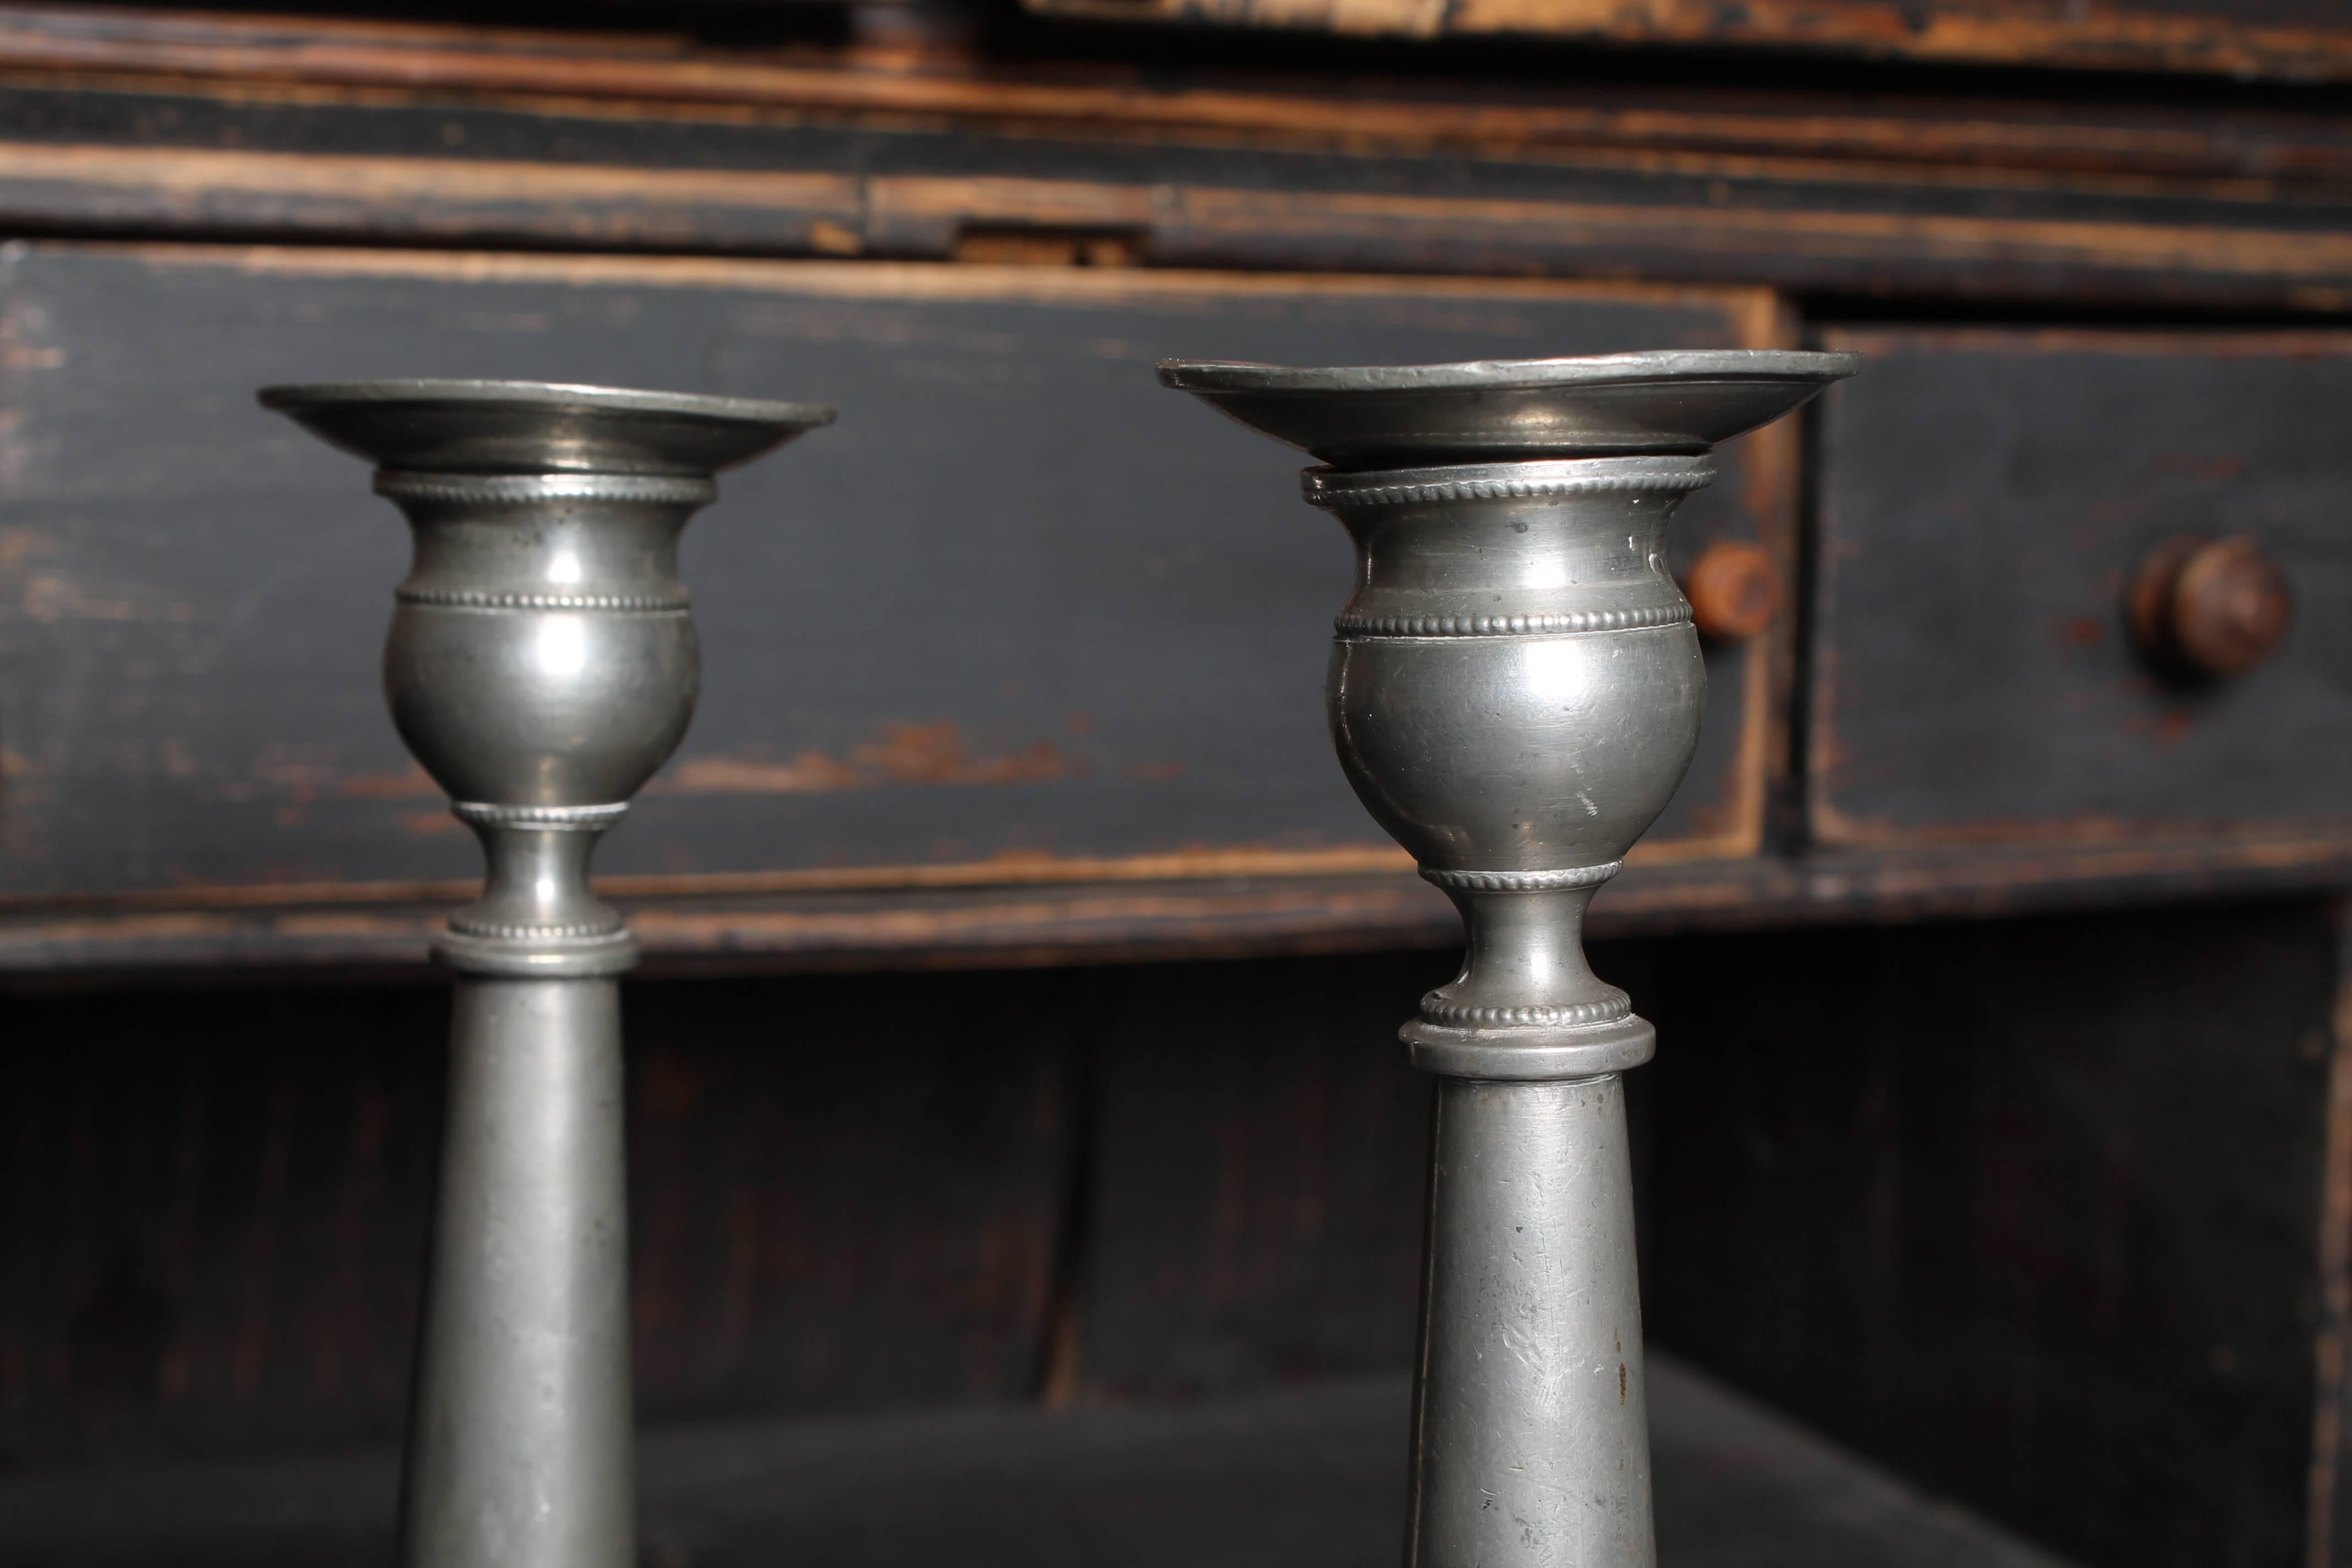 Pair of Gustavian Pewter candle sticks, 1812. Made by Sven Berglund. (1811-1844), Malmö. Typical Gustavian model.